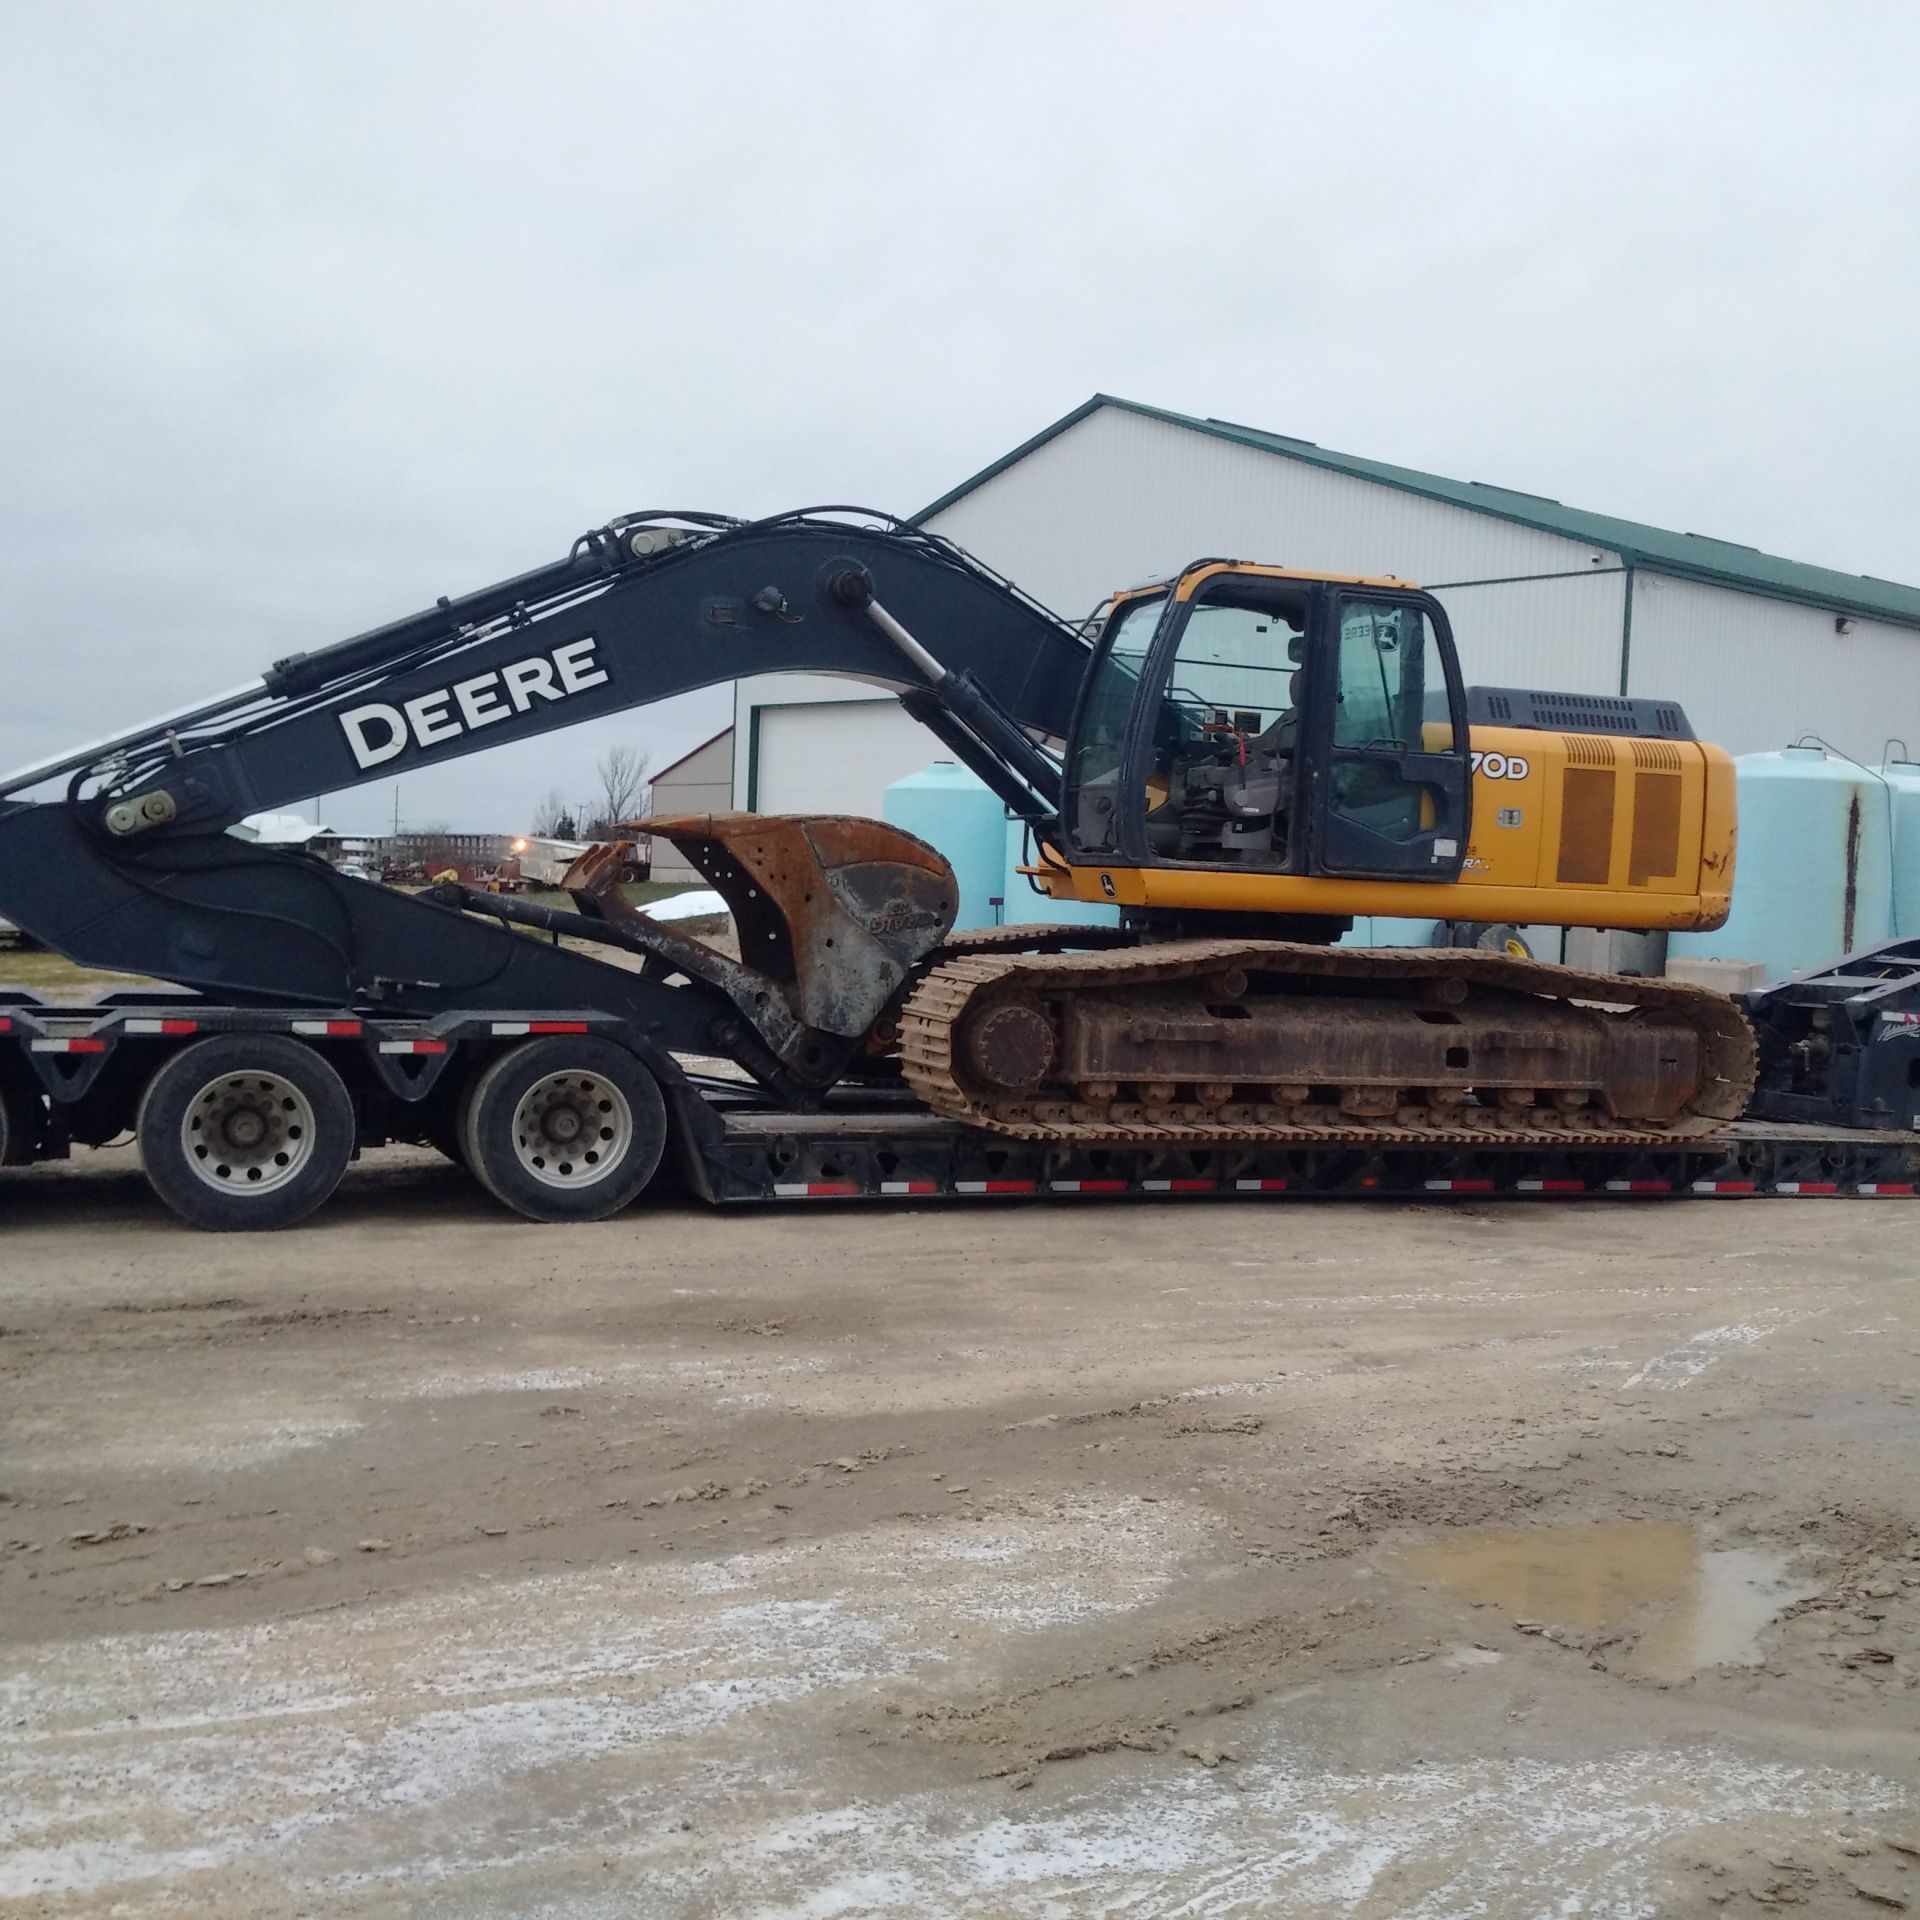 A deere excavator is being transported on a trailer